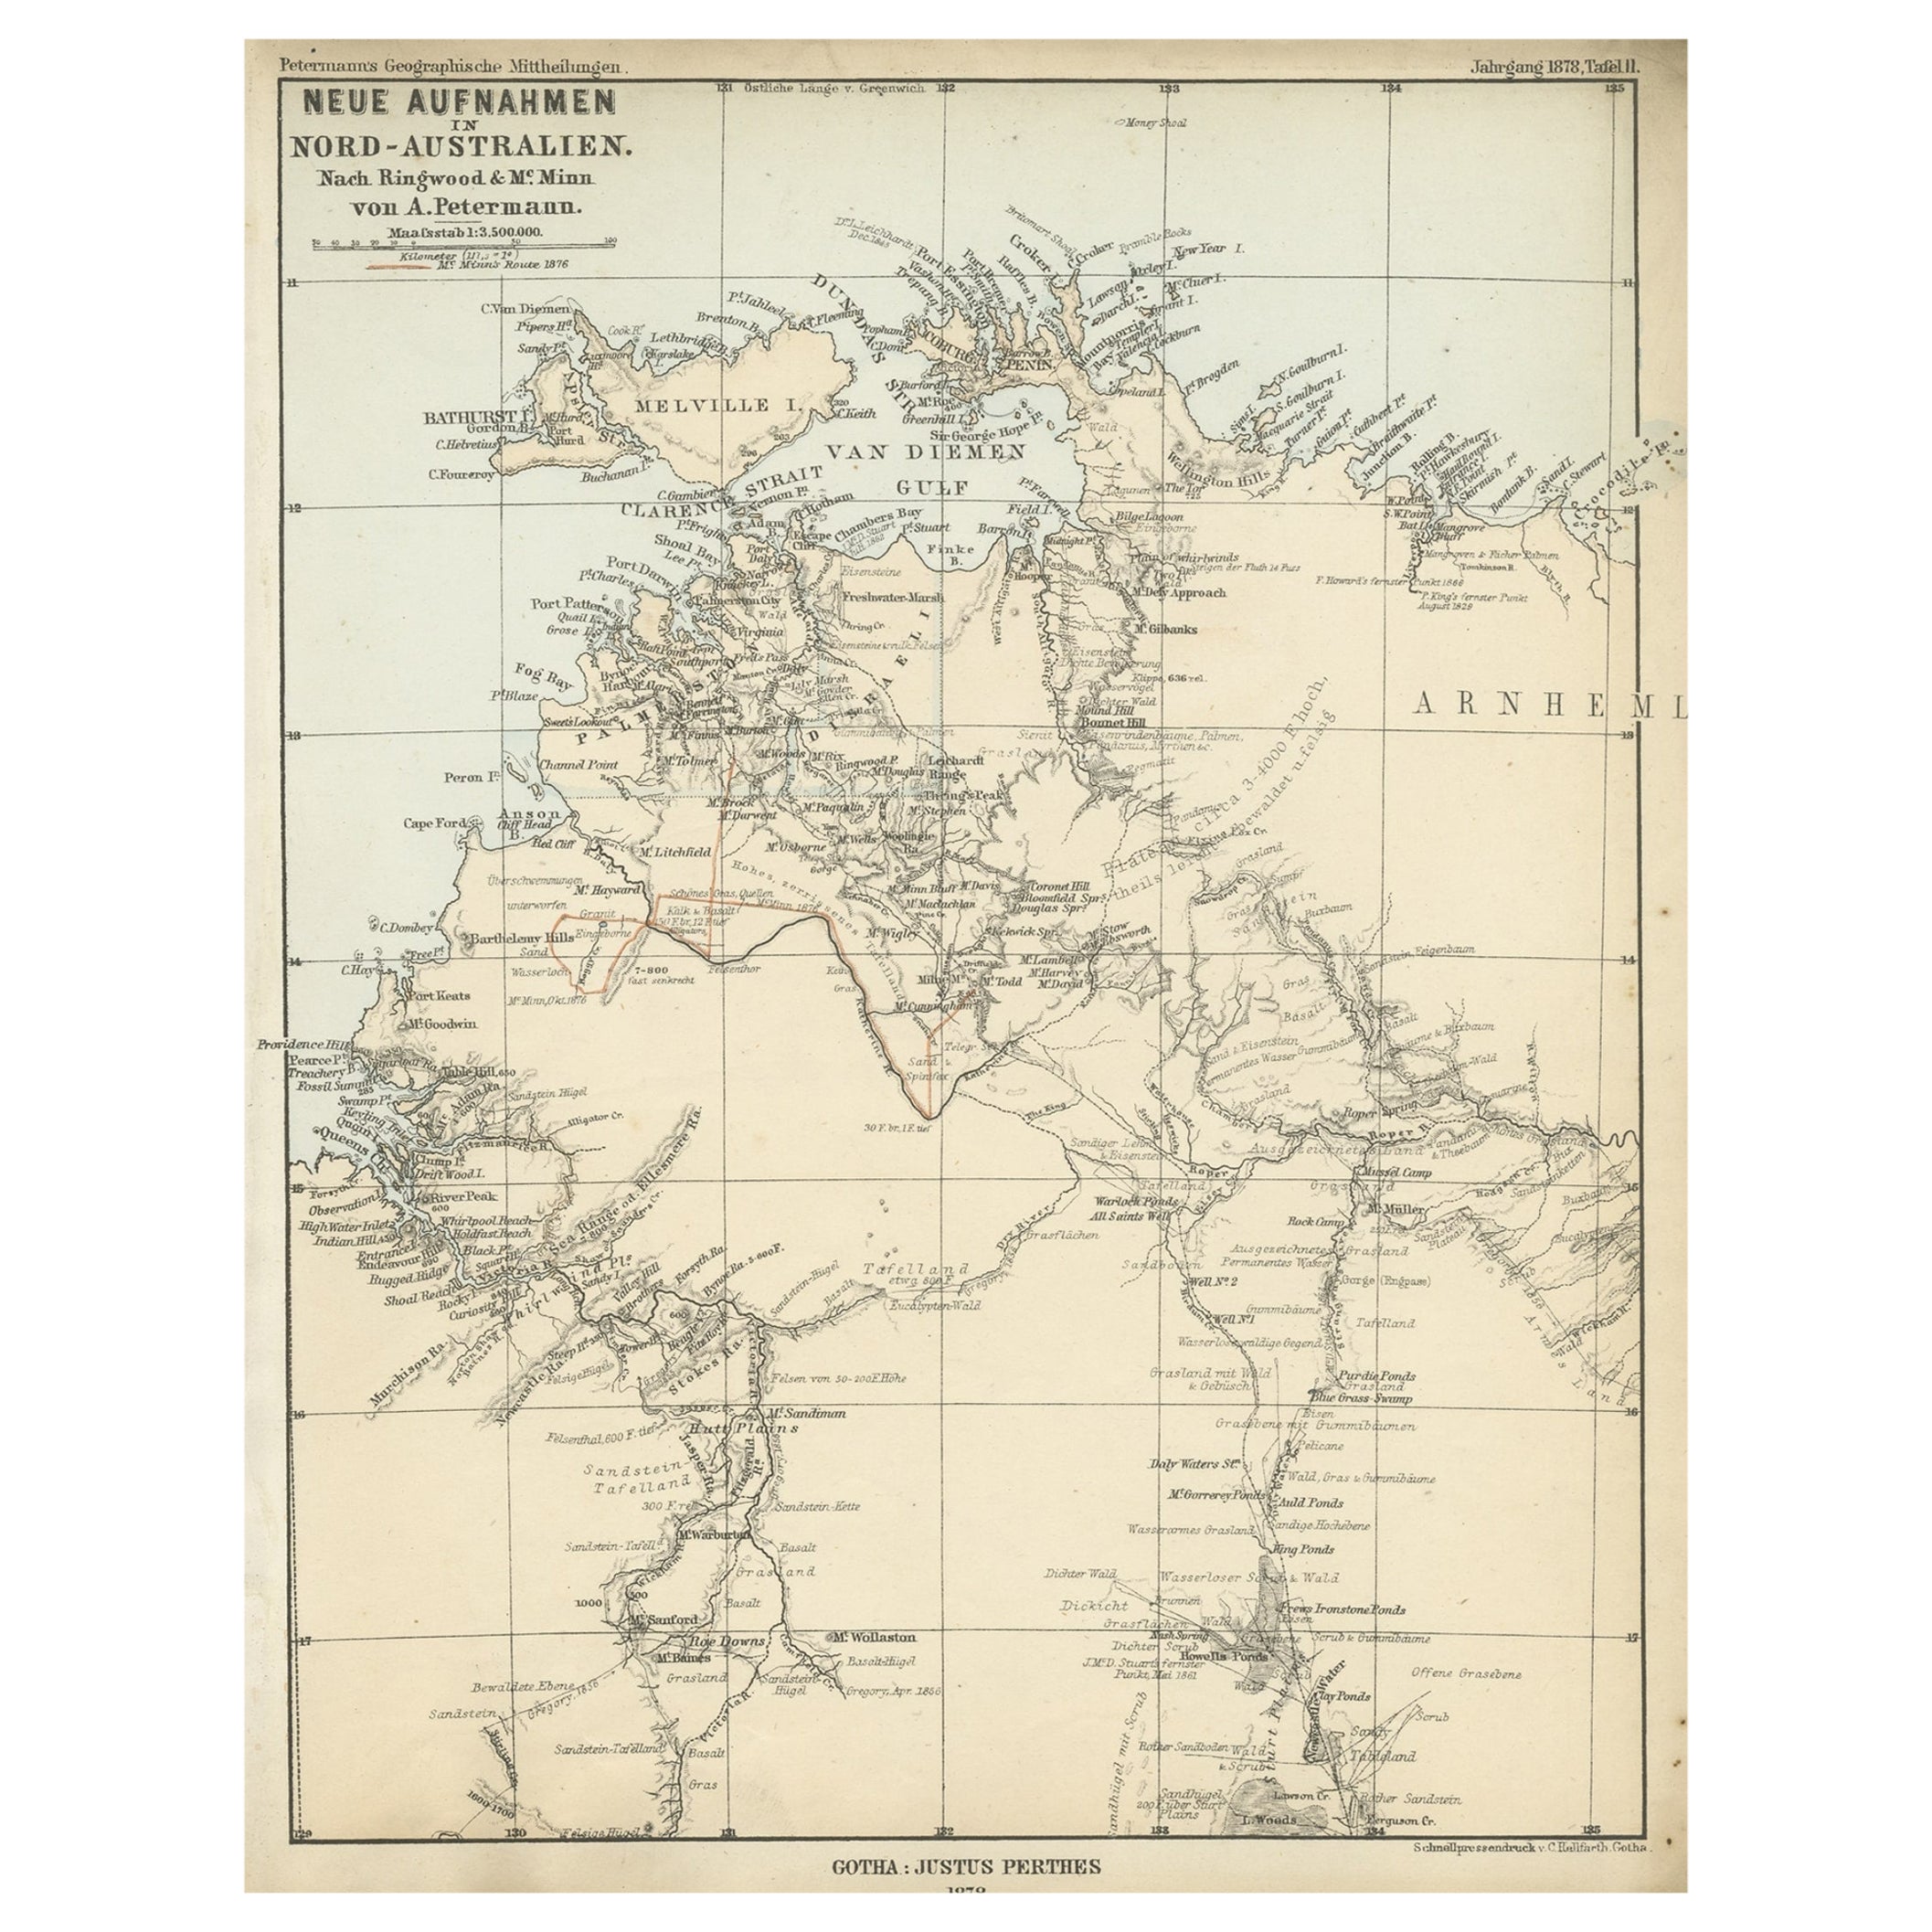 Northern Australia Map with The Routes of Explorers Ringwood and McMinn, 1878 For Sale